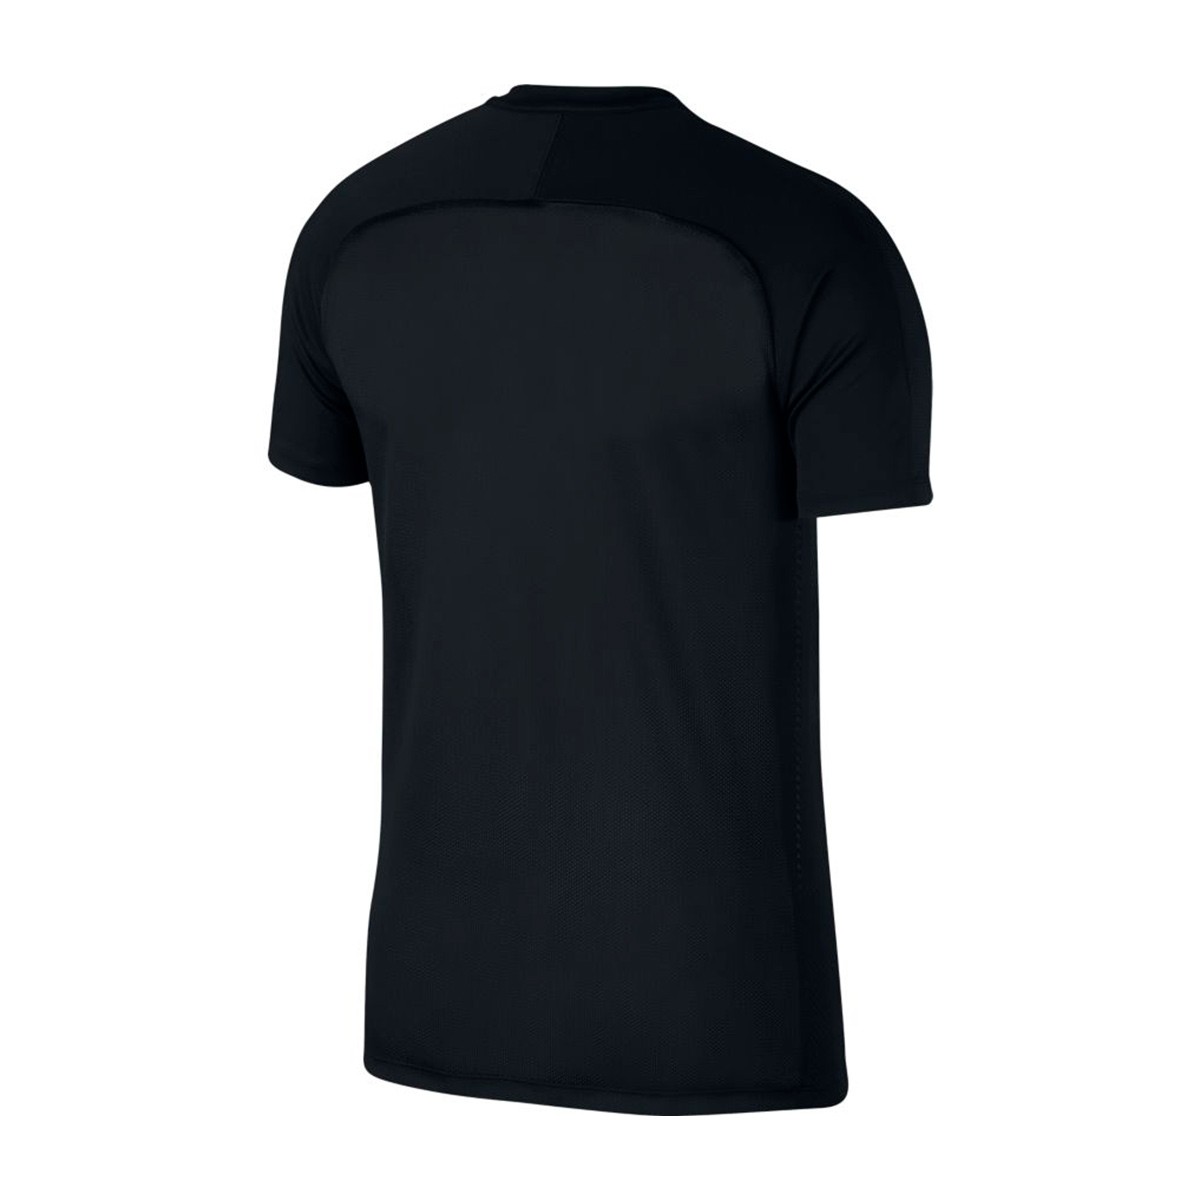 Jersey Nike Dry Academy Top SS GX2 Black-Hot punch - Football store Fútbol  Emotion